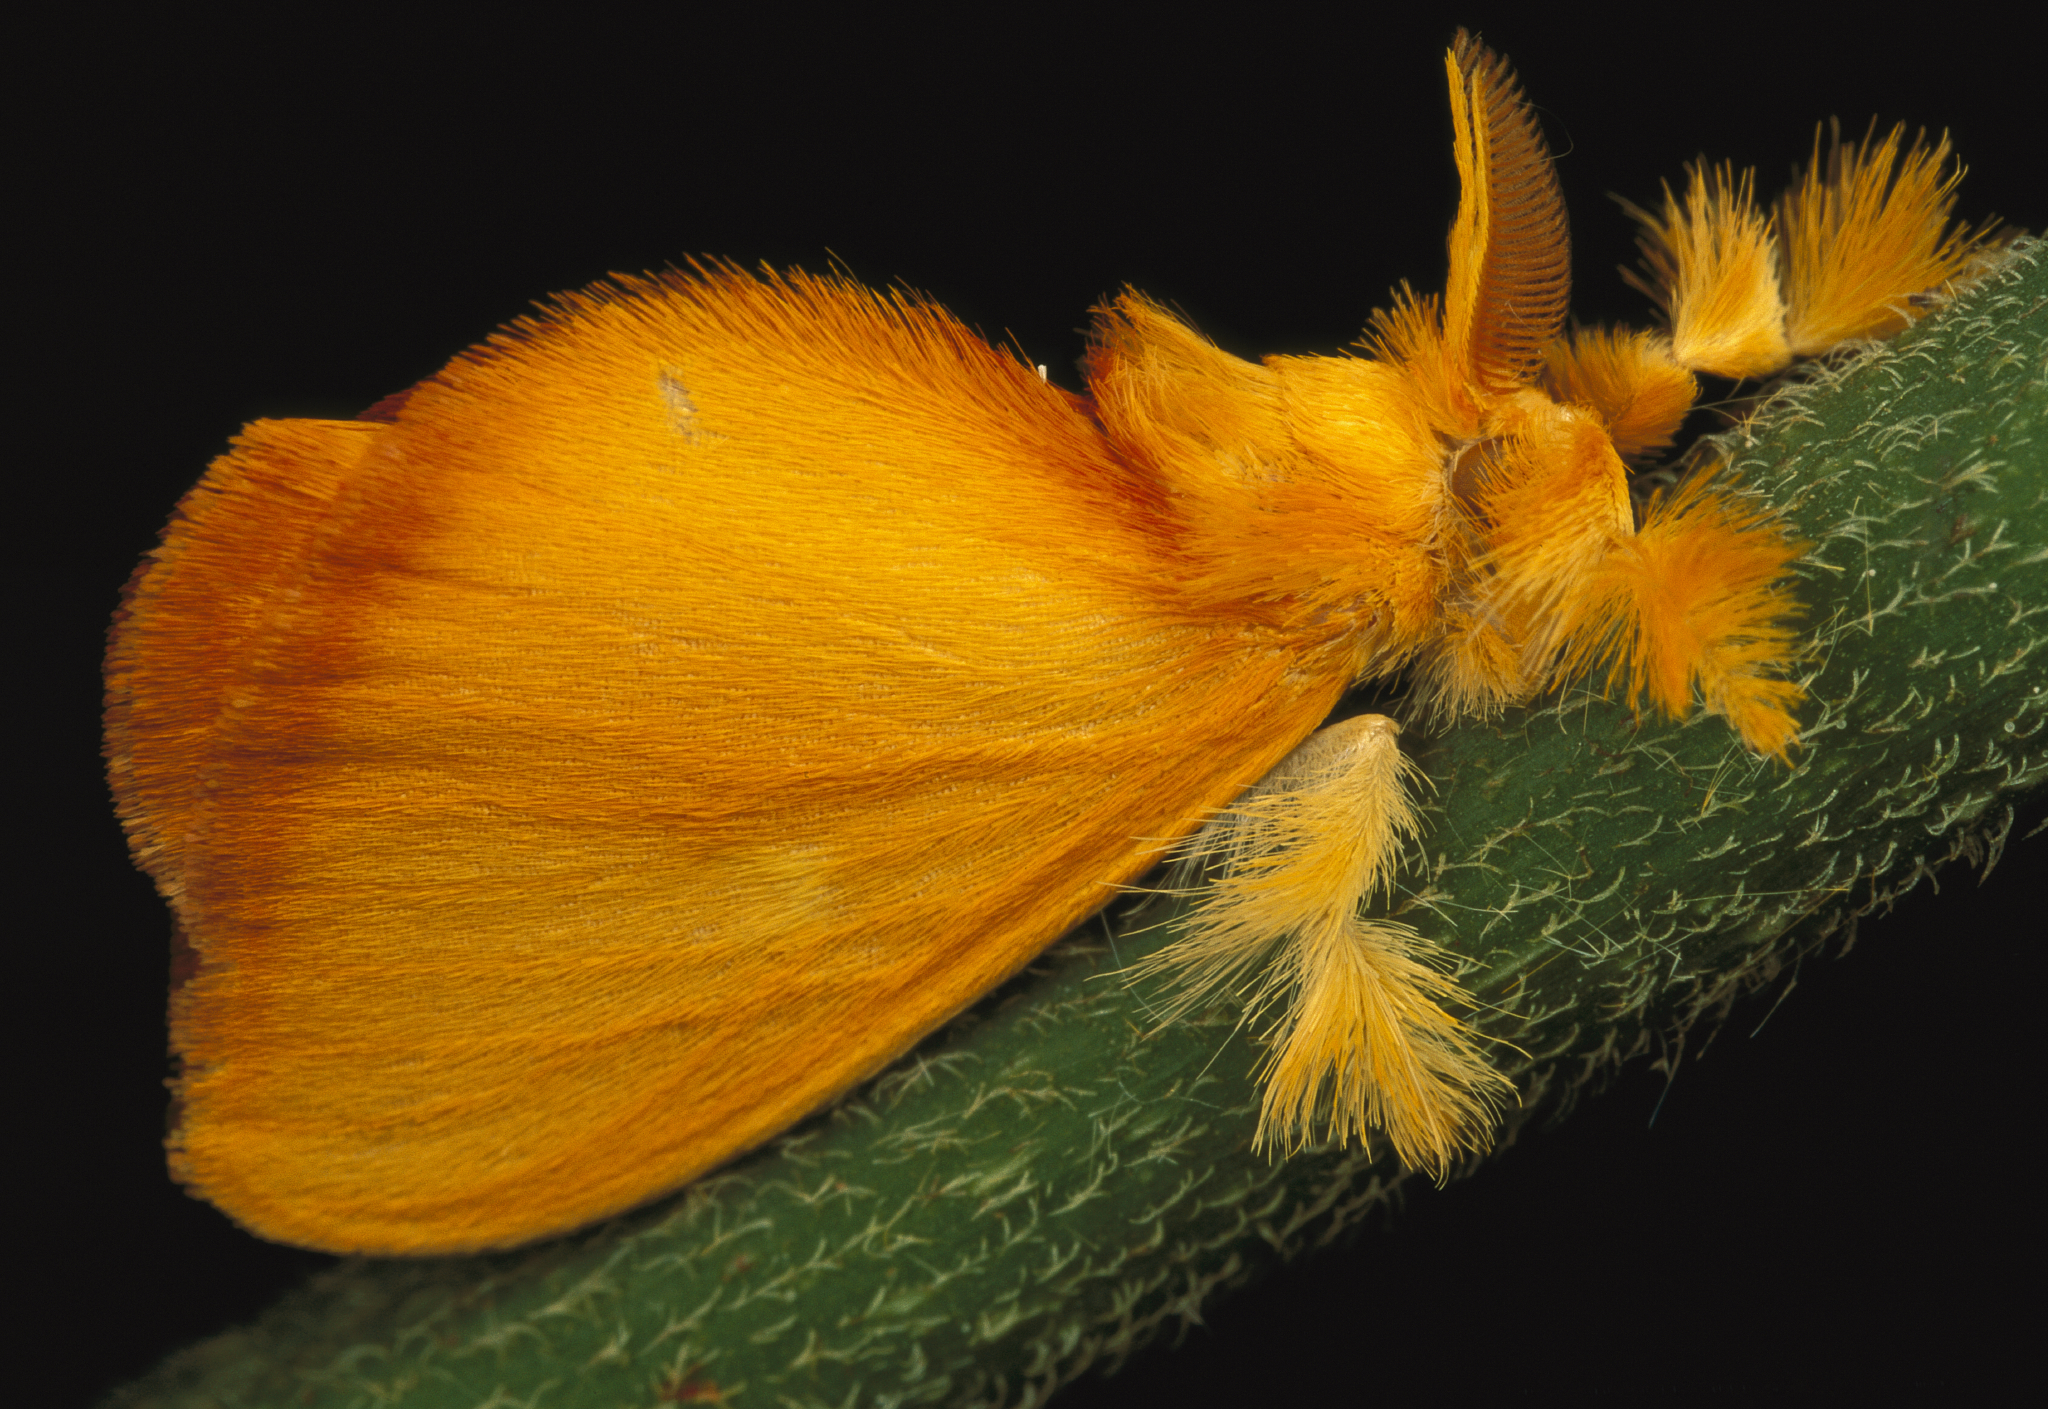 15 Pictures of Adaptable, Beautiful, and Misunderstood Moths